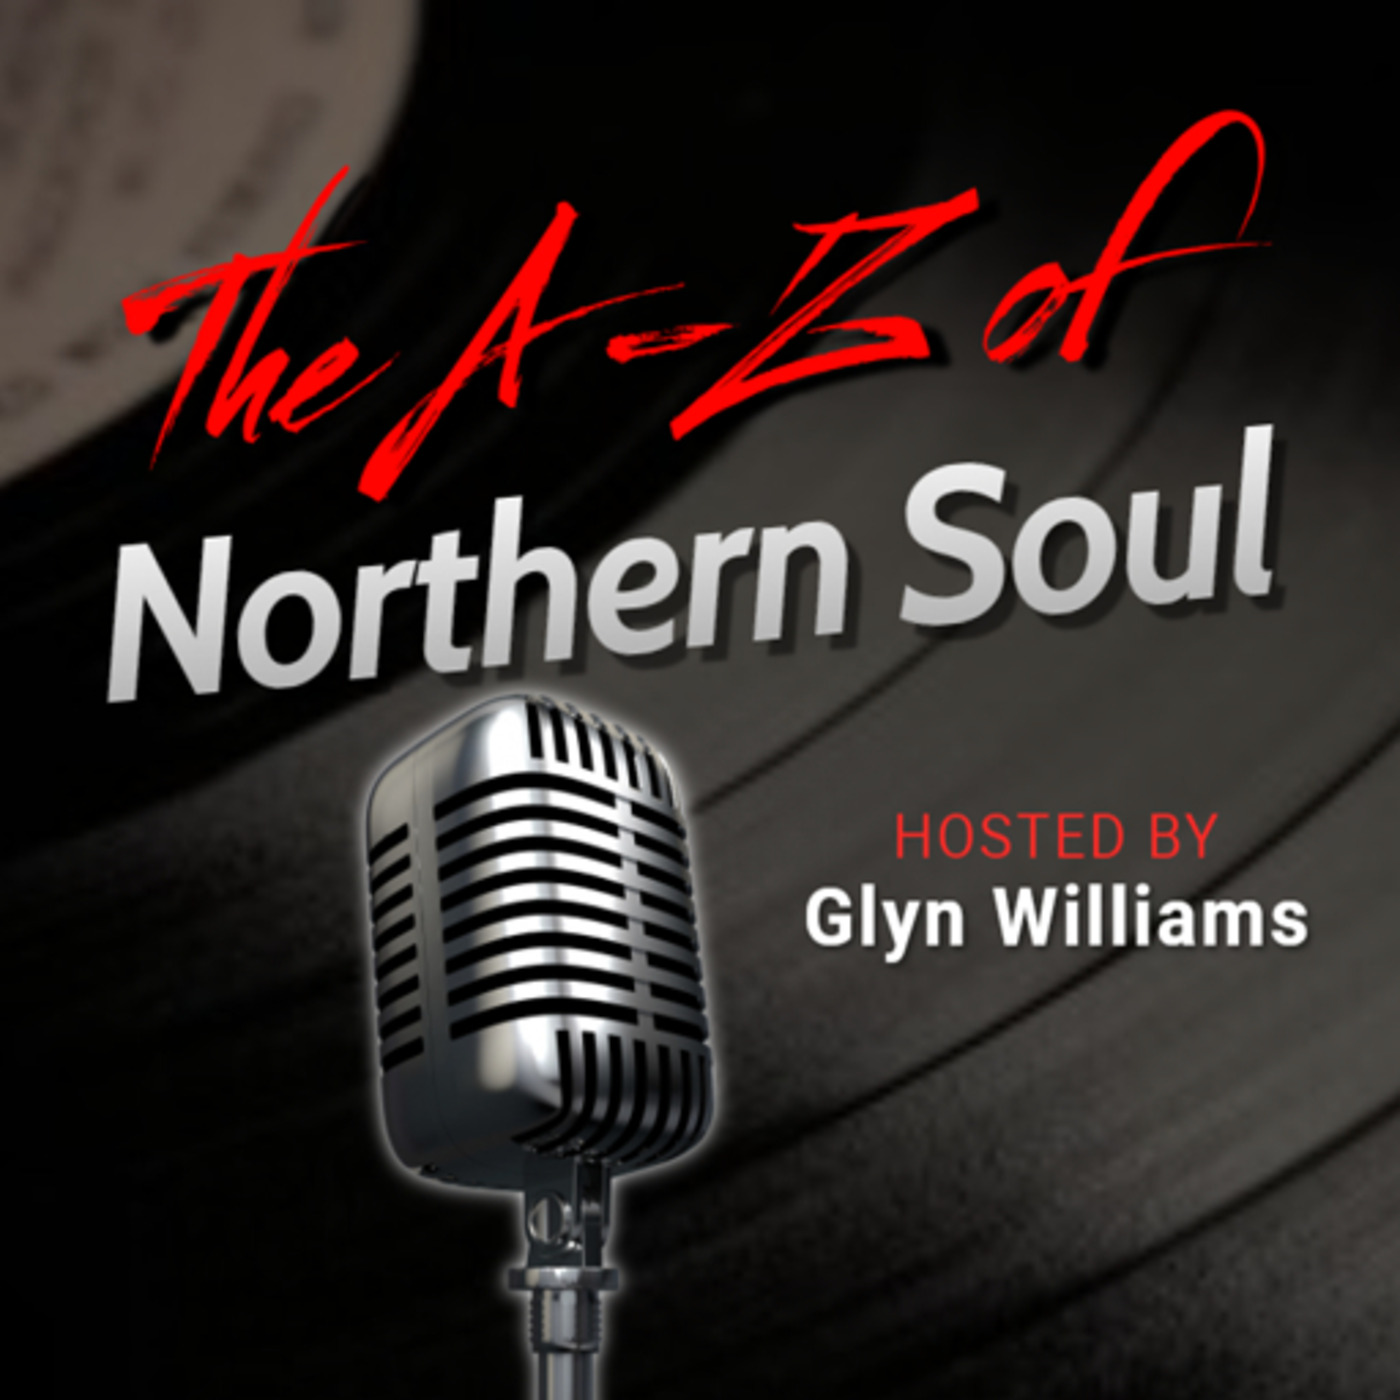 The A-Z of Northern Soul E009